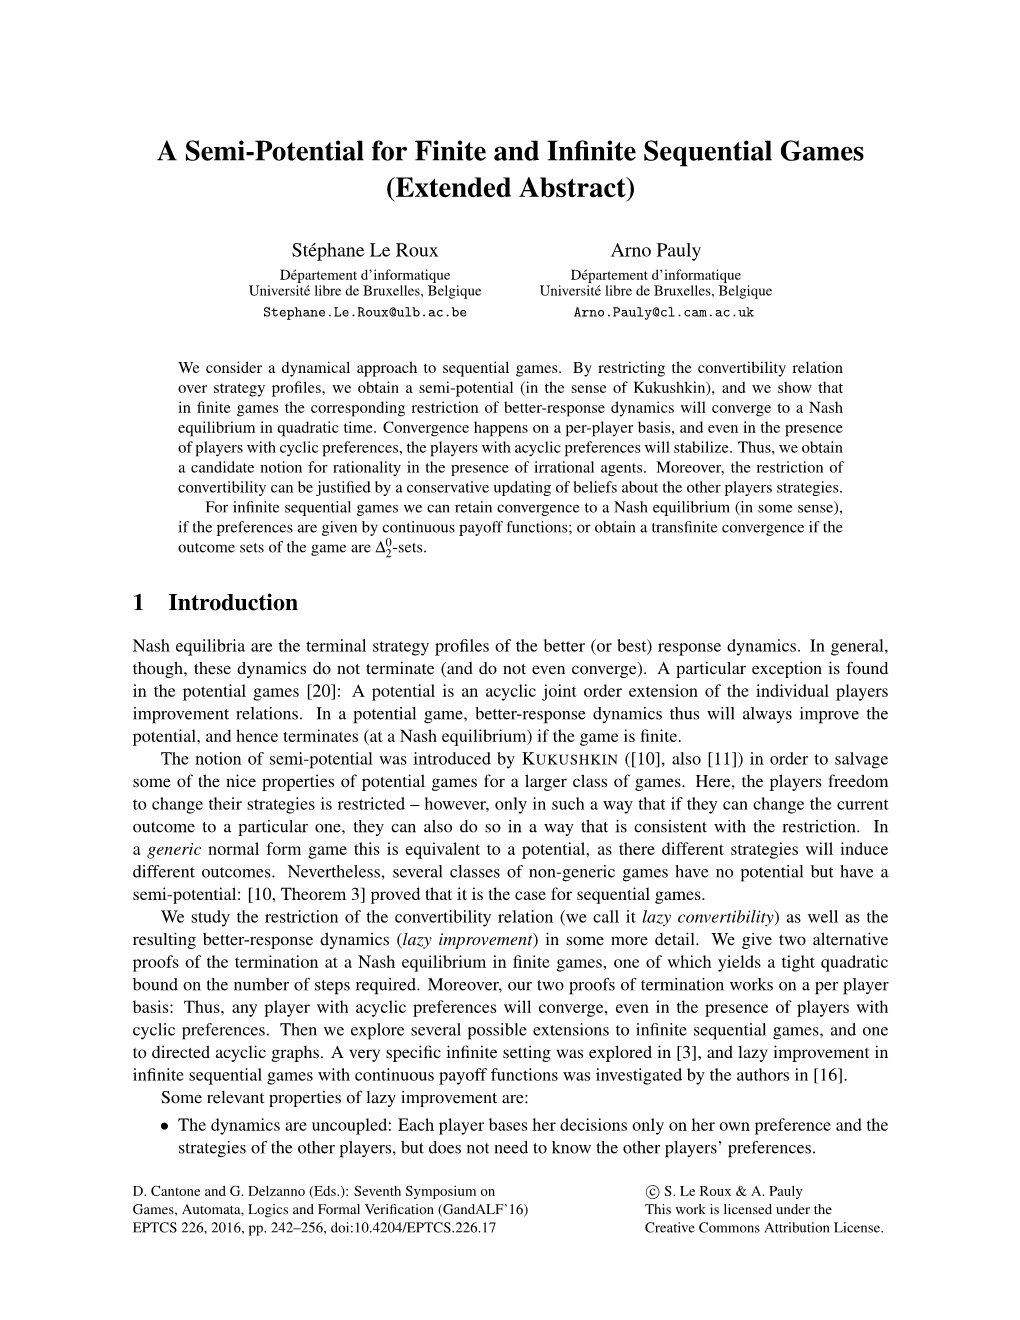 A Semi-Potential for Finite and Infinite Sequential Games (Extended